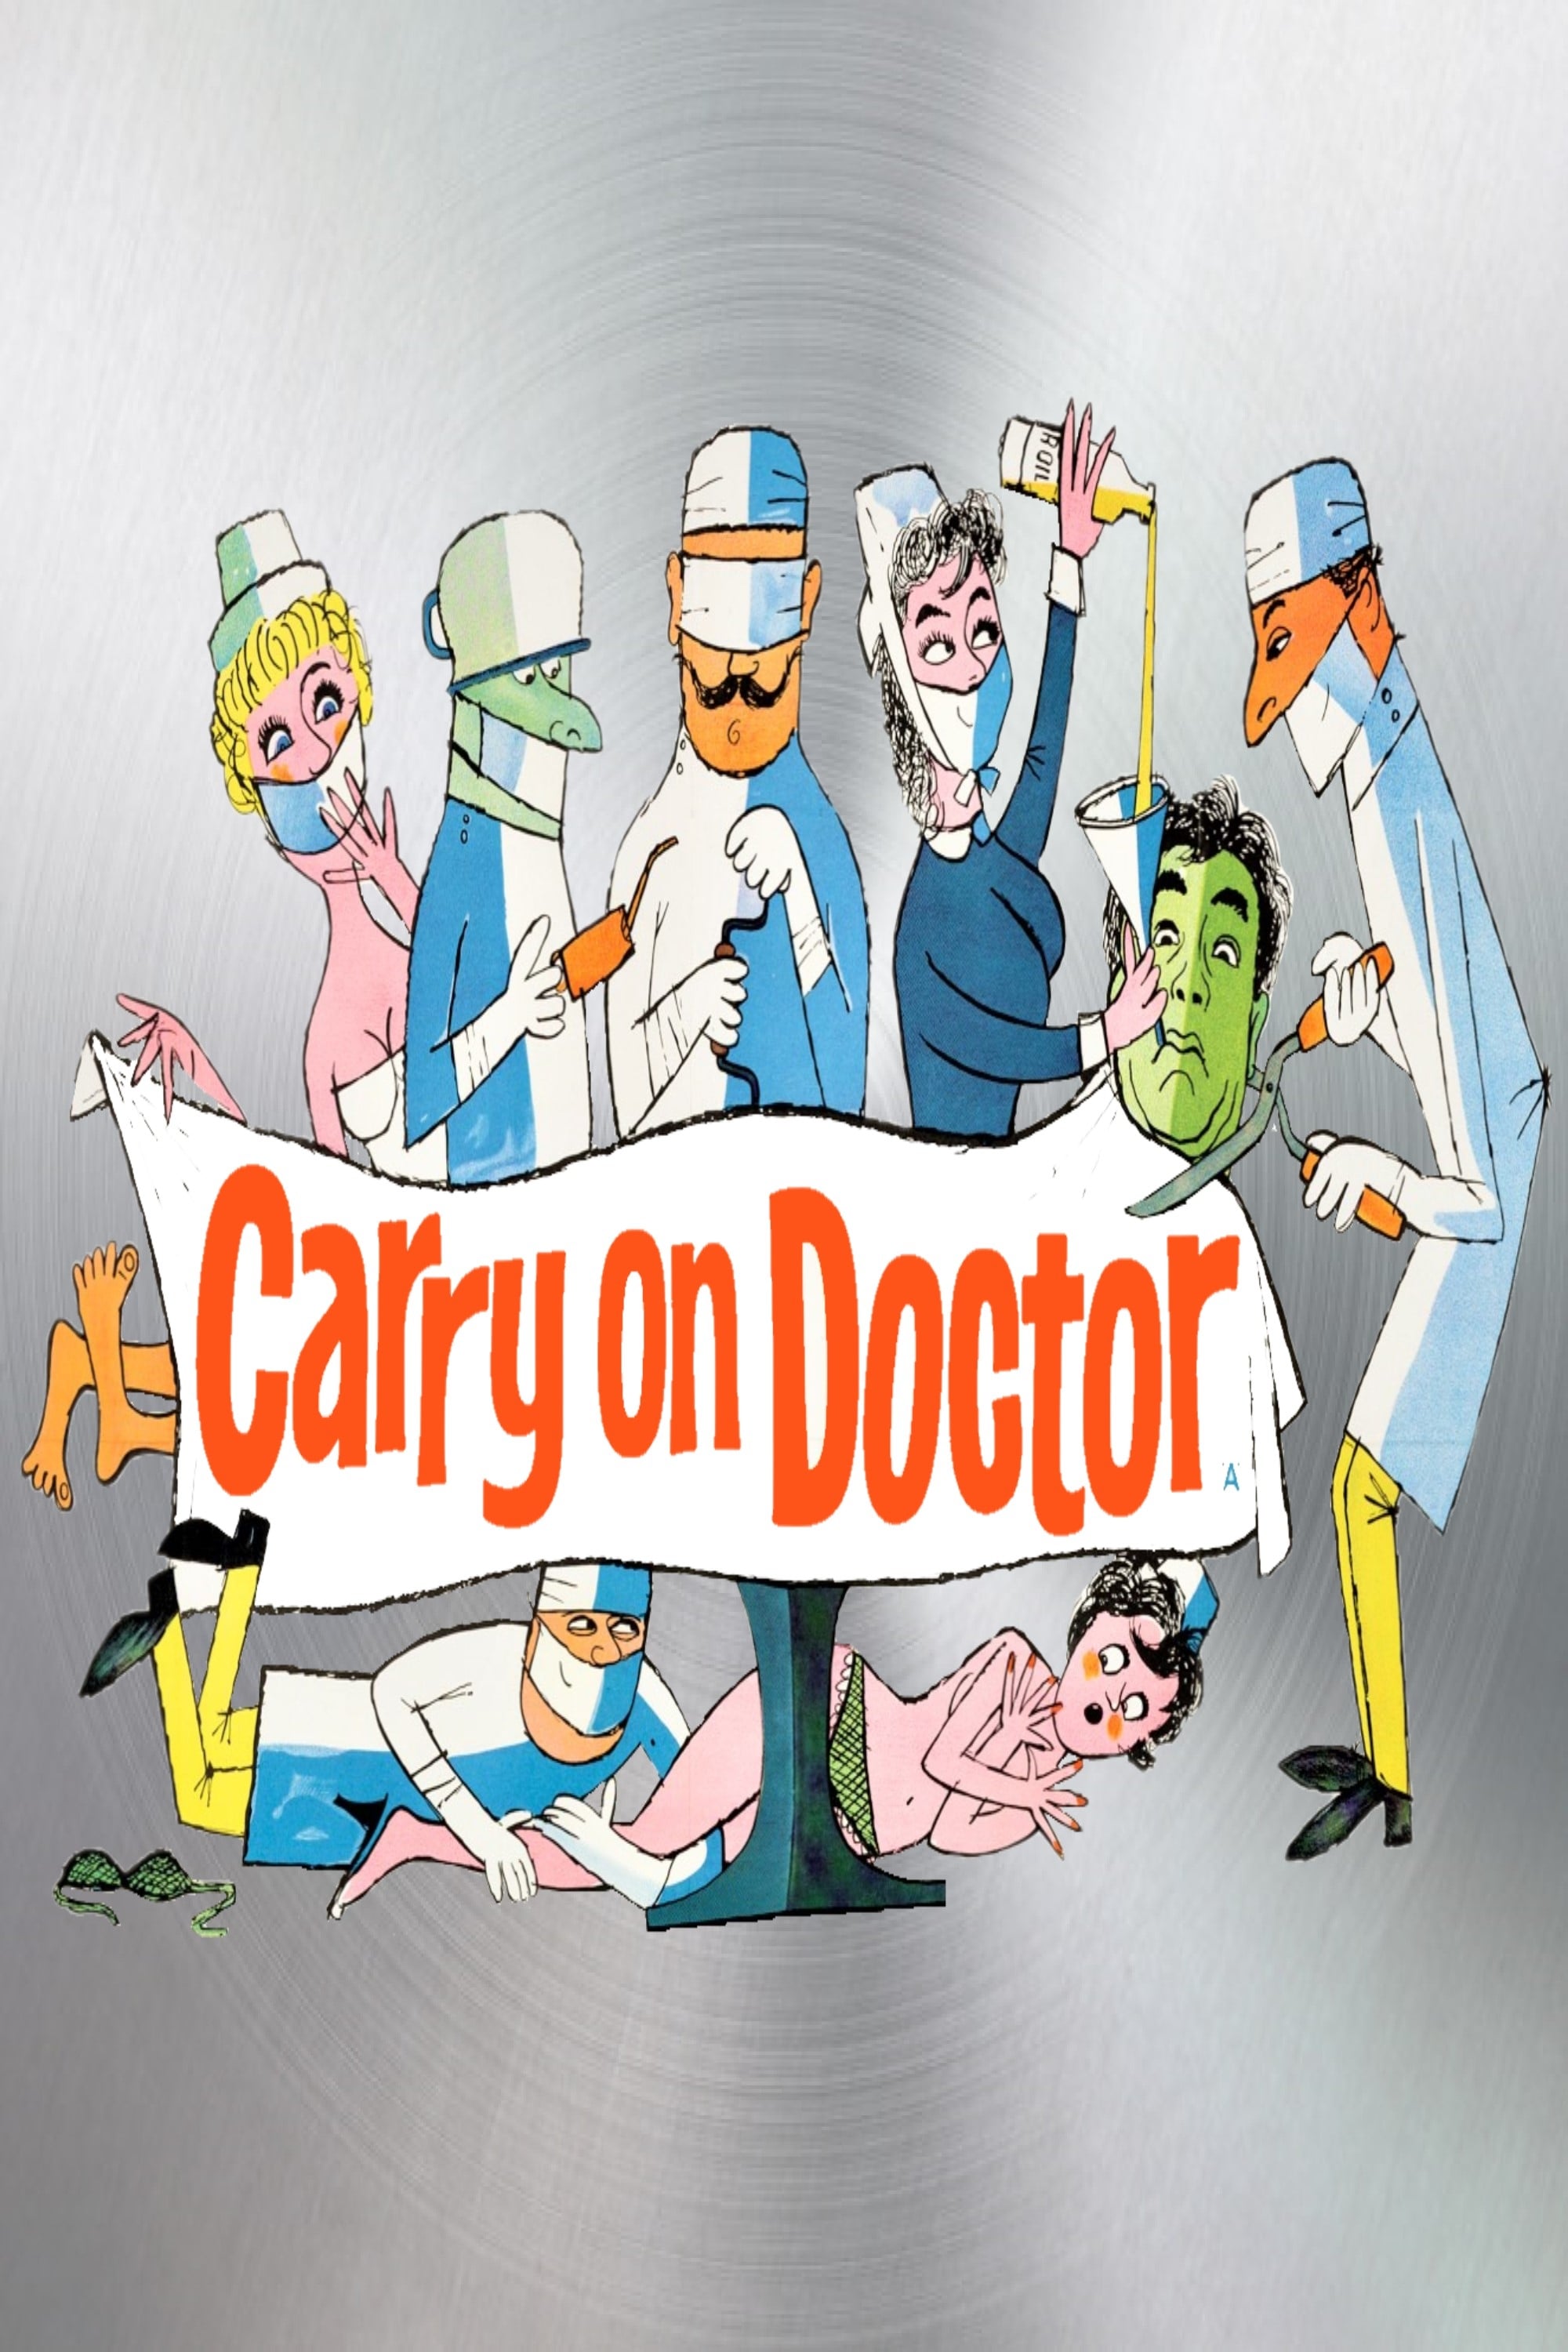 Carry On Doctor (1967)